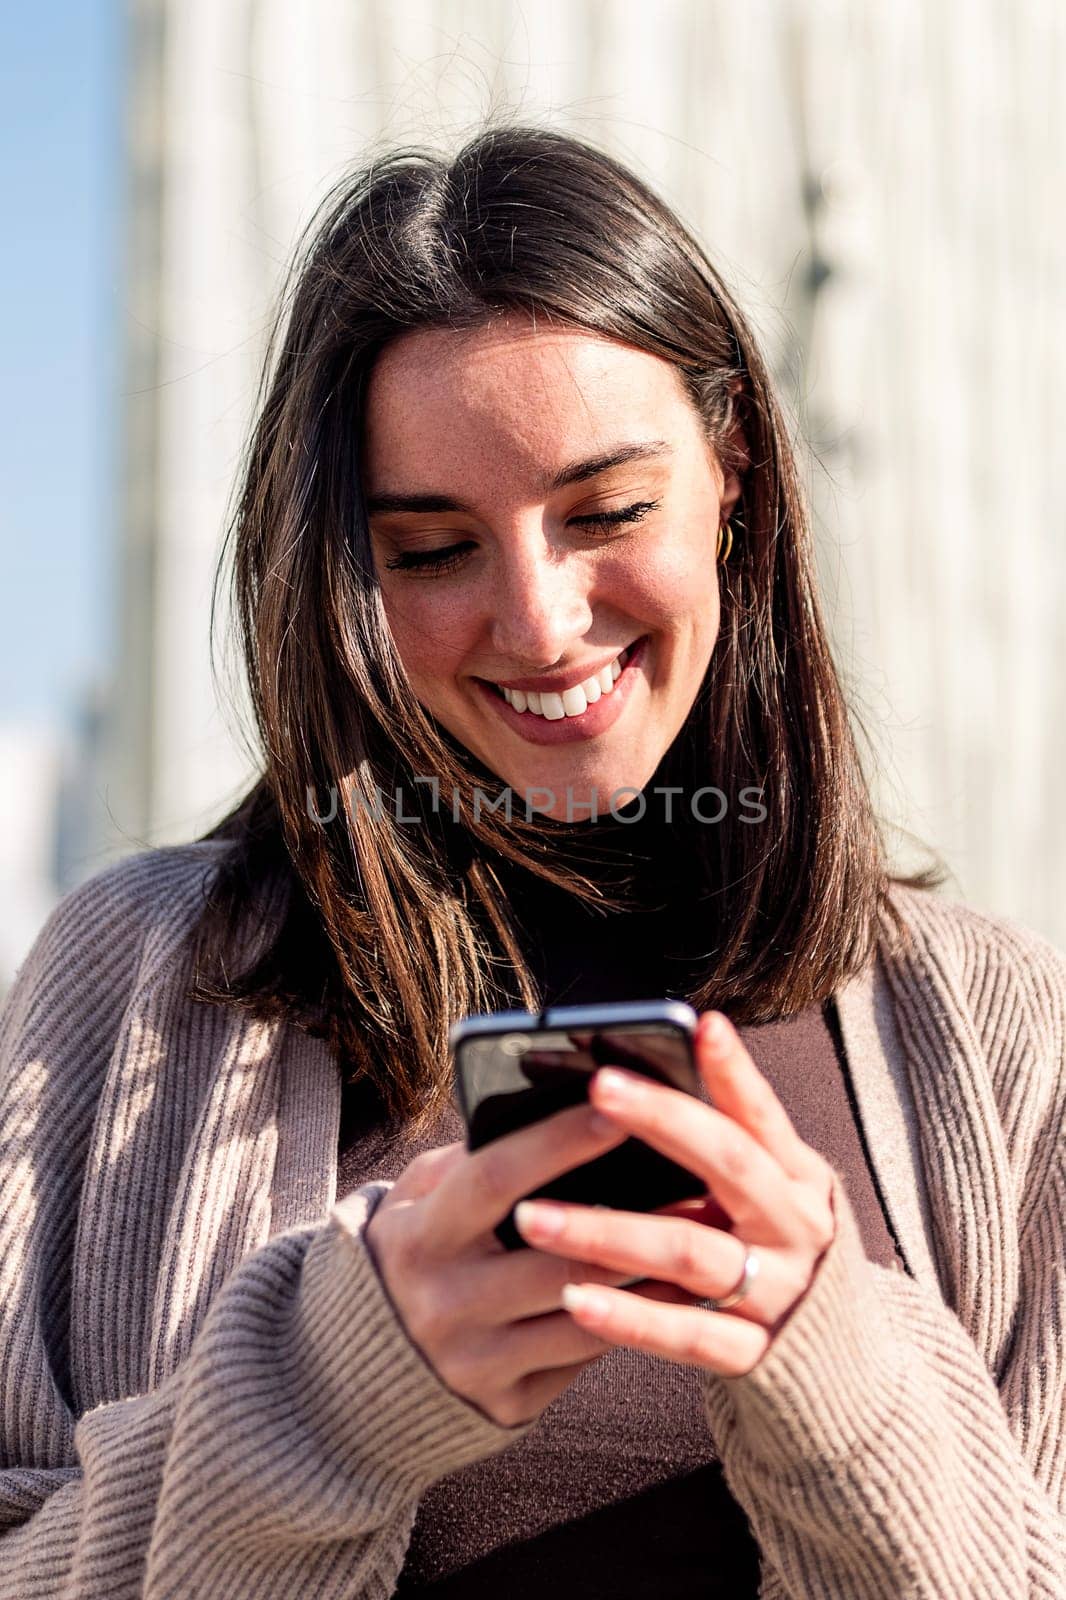 woman smiling happy while texting on her phone by raulmelldo